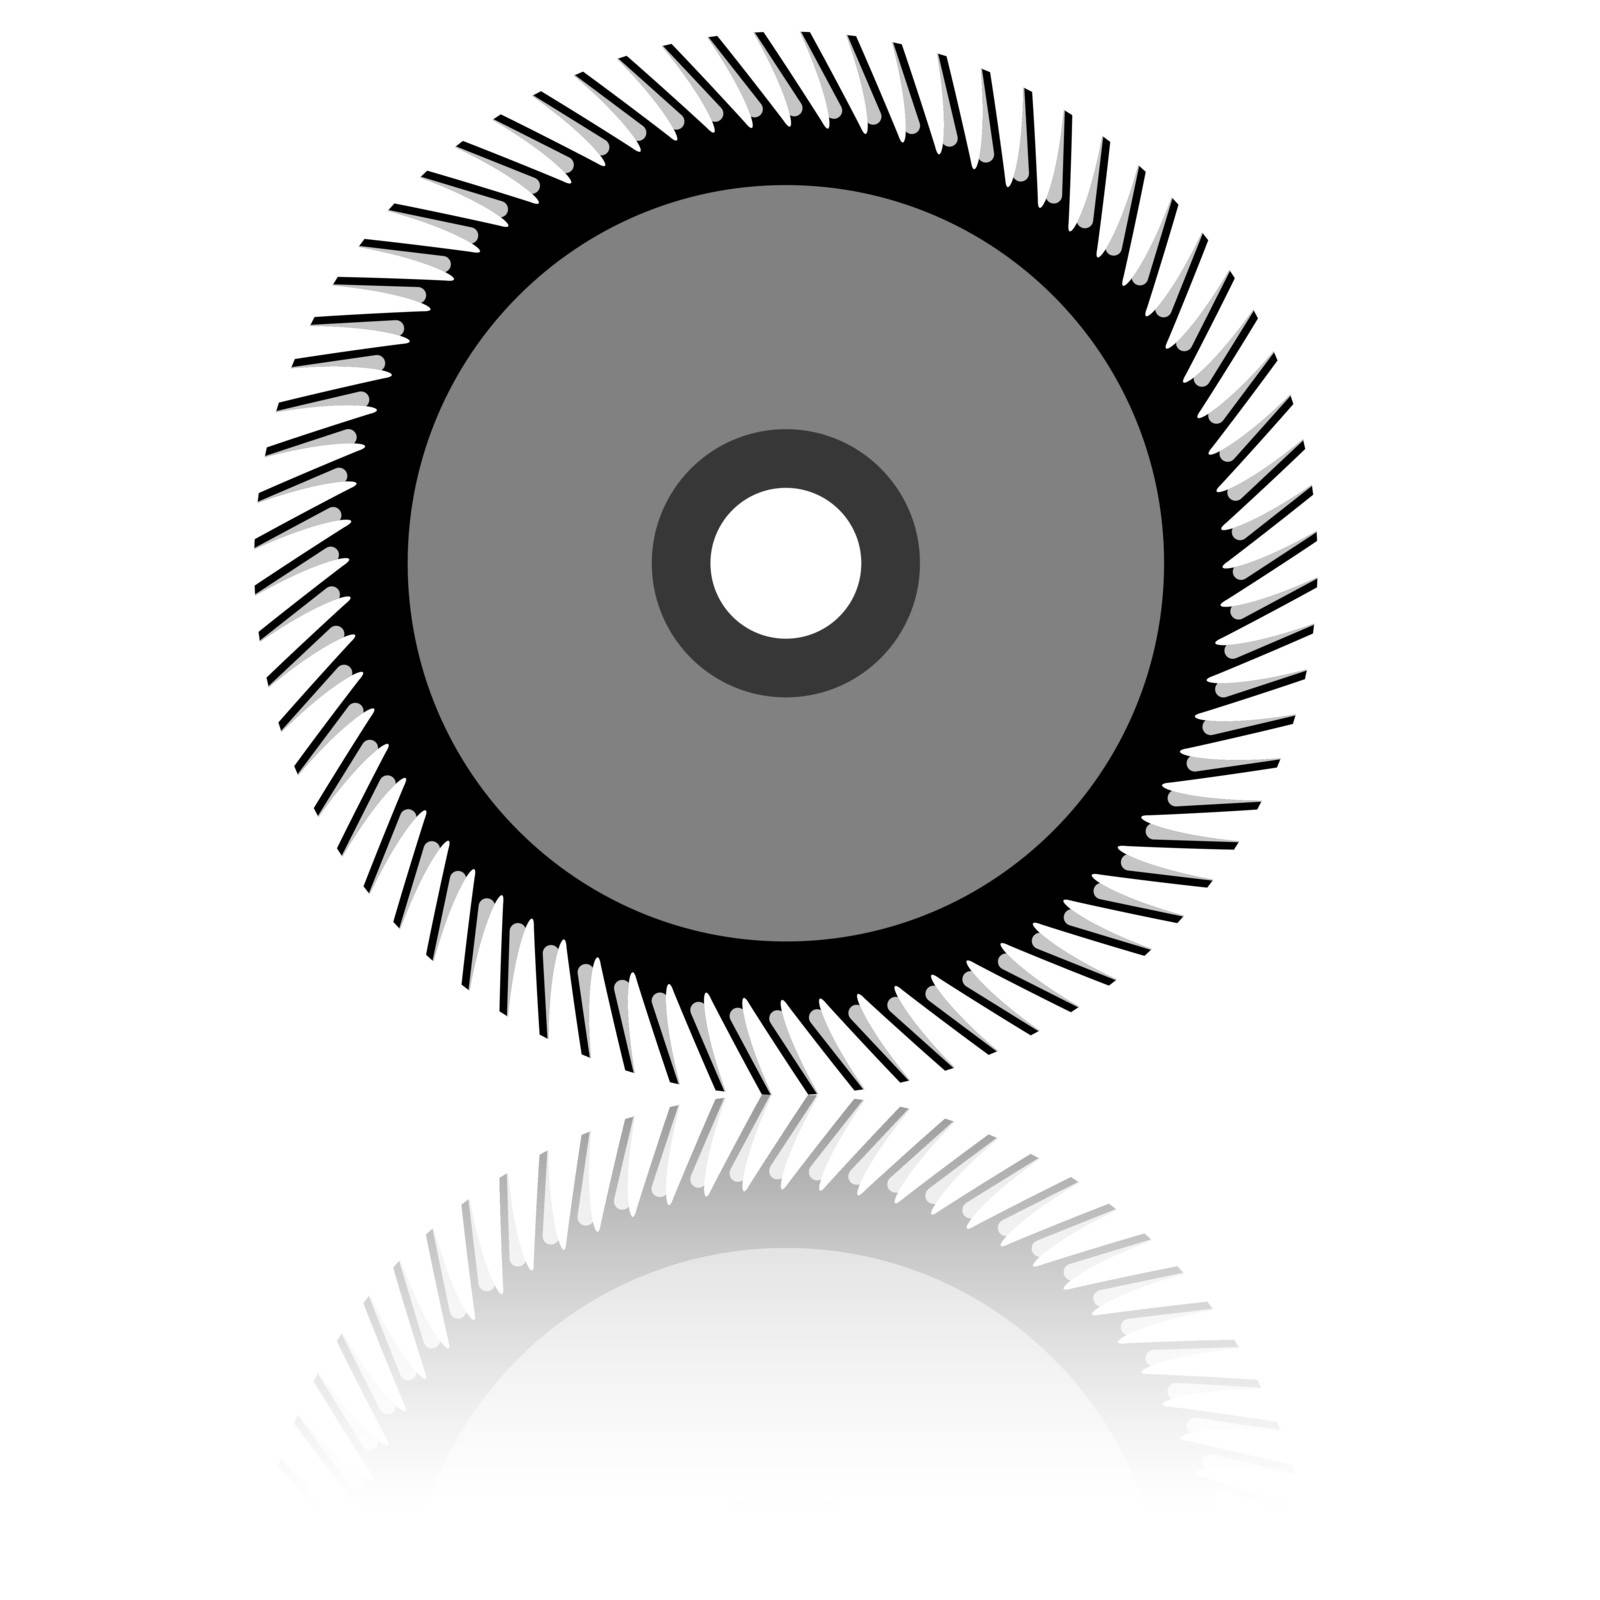 Circular saw blade on a white background. Vector illustration.